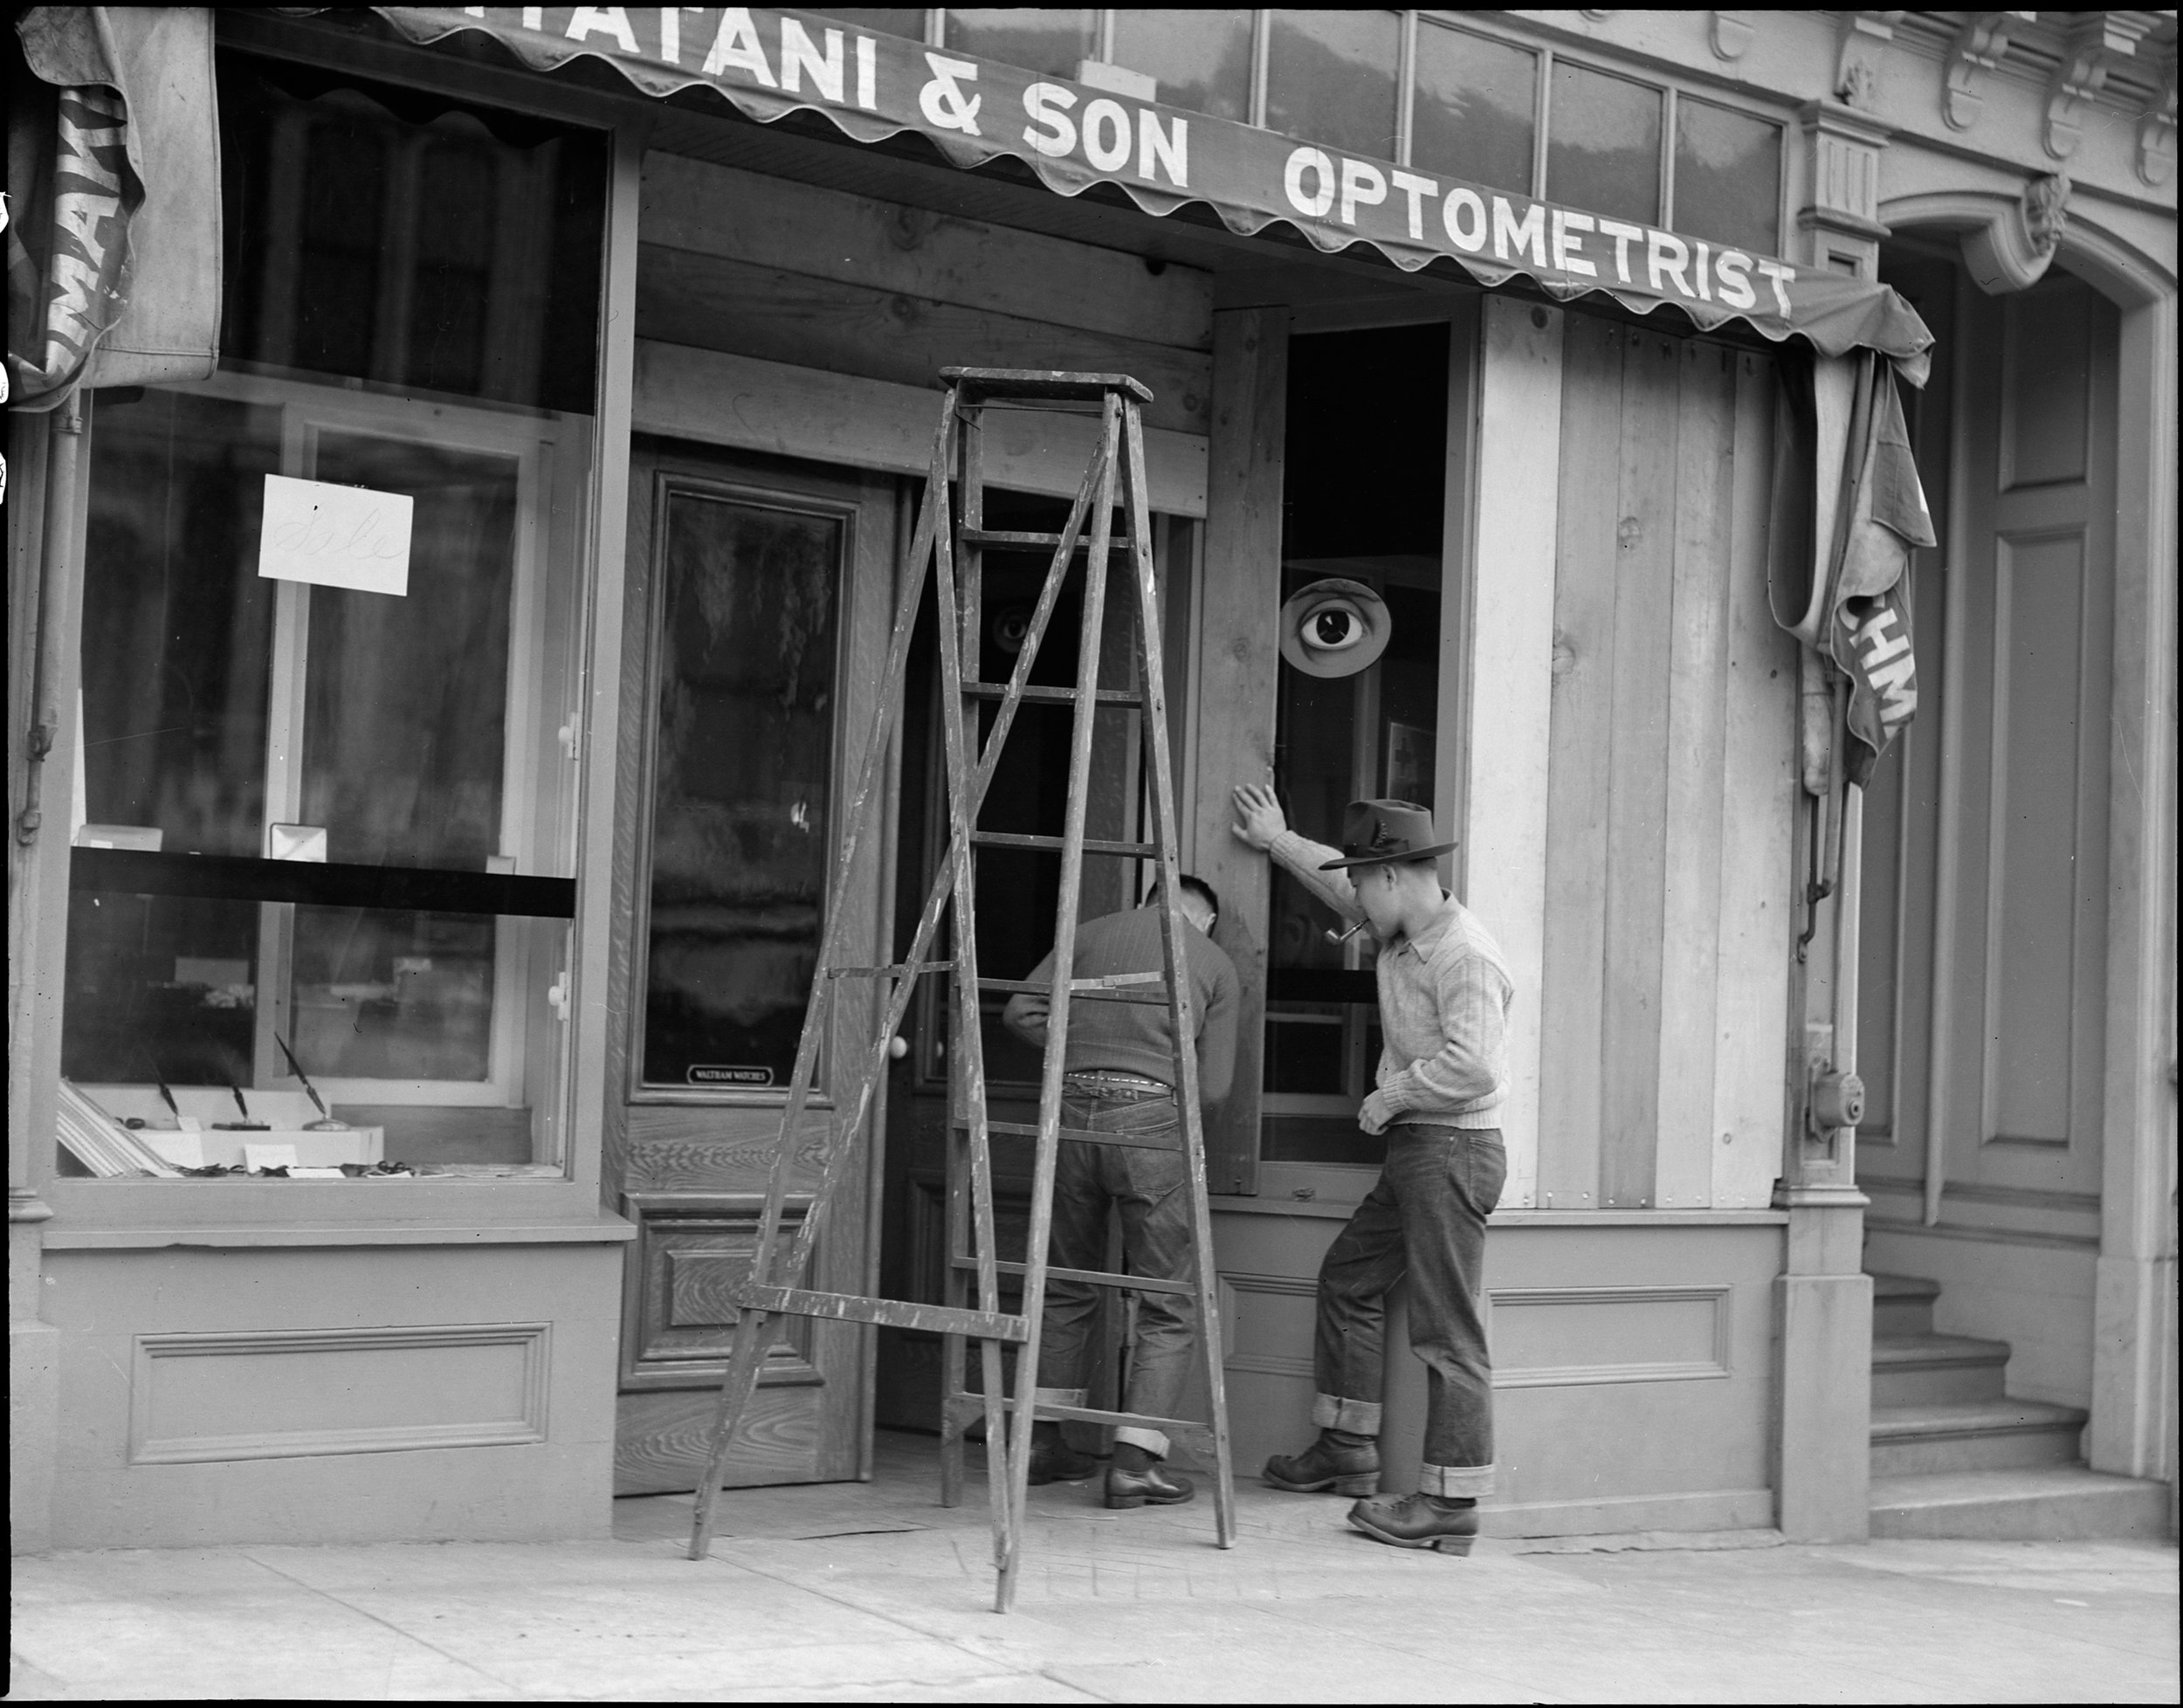  San Francisco, California. Owners of Japanese ancestry board up windows of their stores prior to evacuation. Evacuees will be housed in War Relocation Authority centers for the duration. 